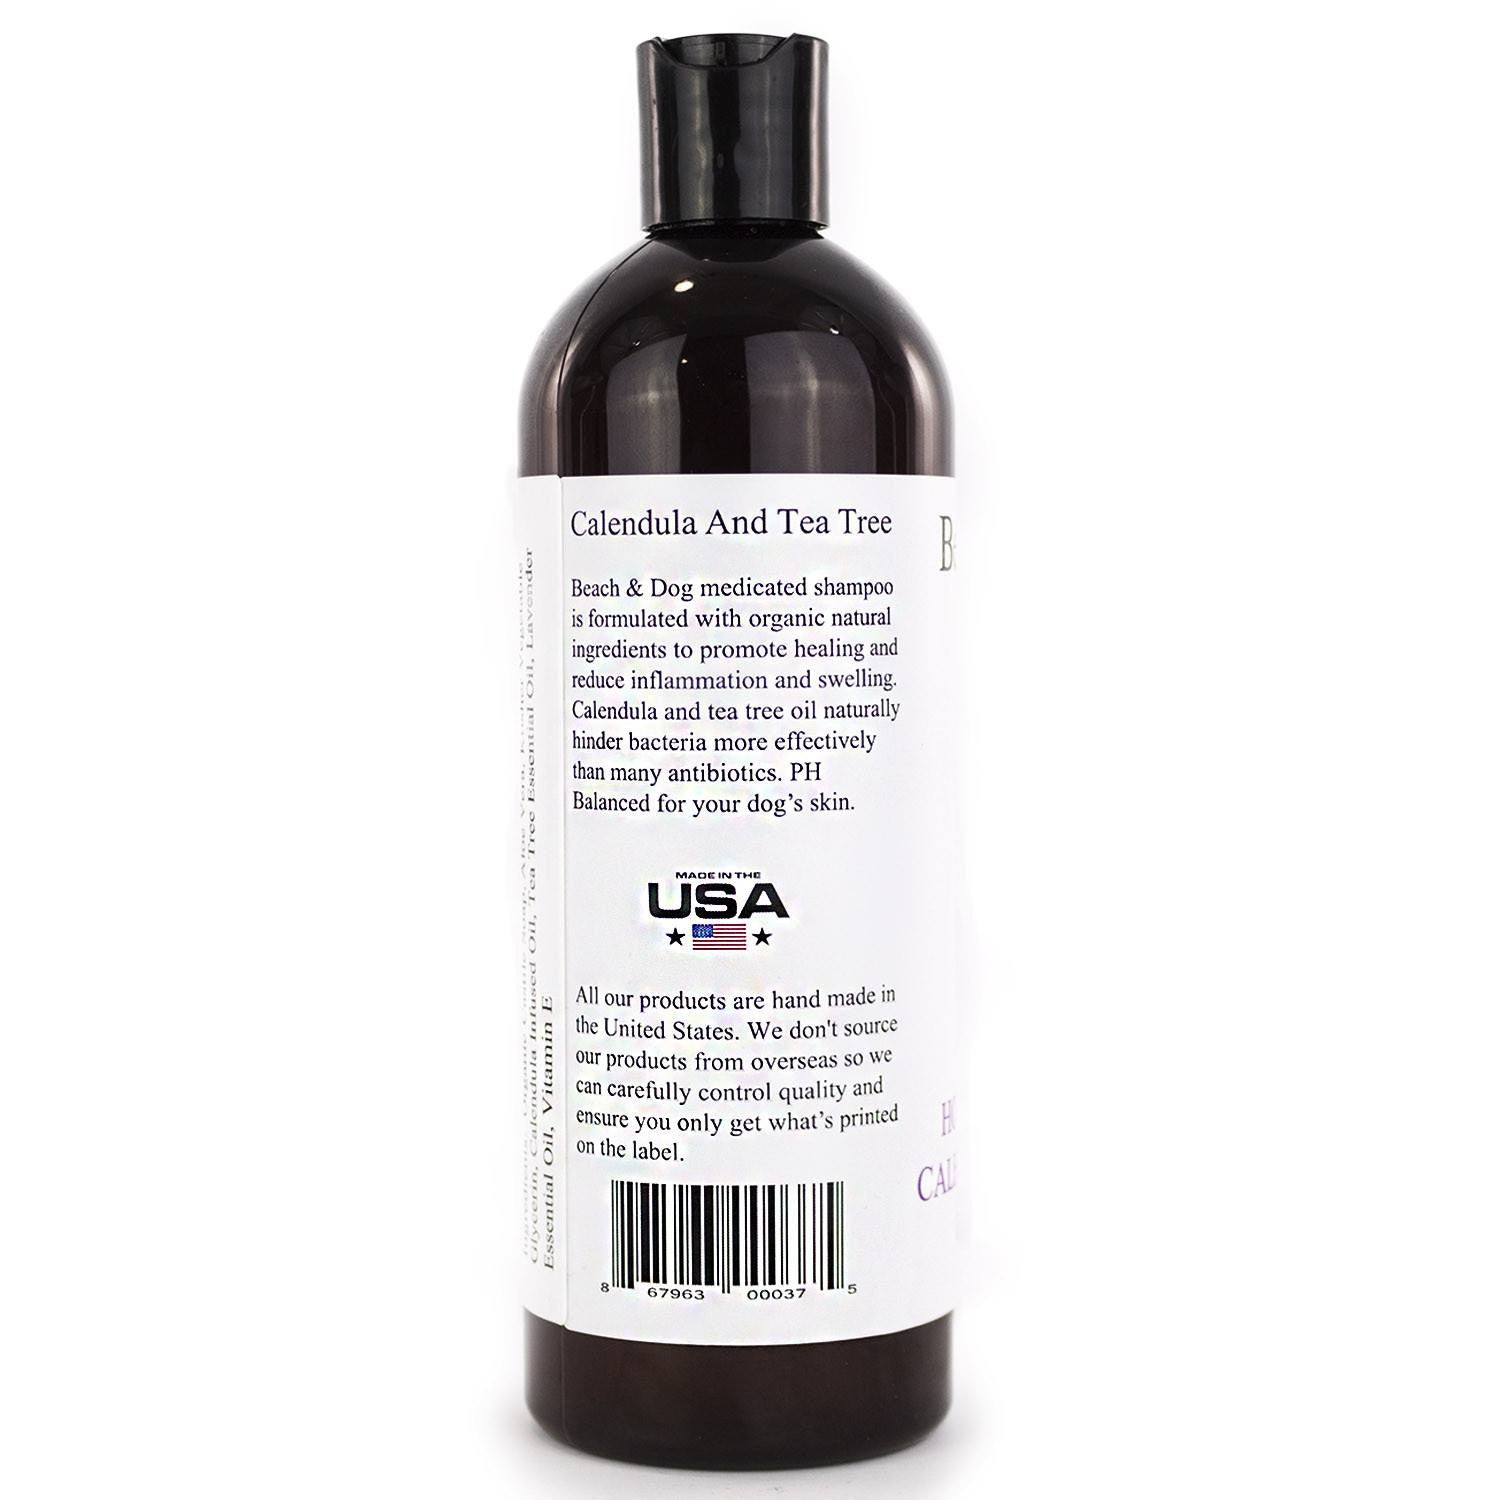 Hot Spot Shampoo (Lavender) - All Natural Itch Relief - Beach & Dog Co.